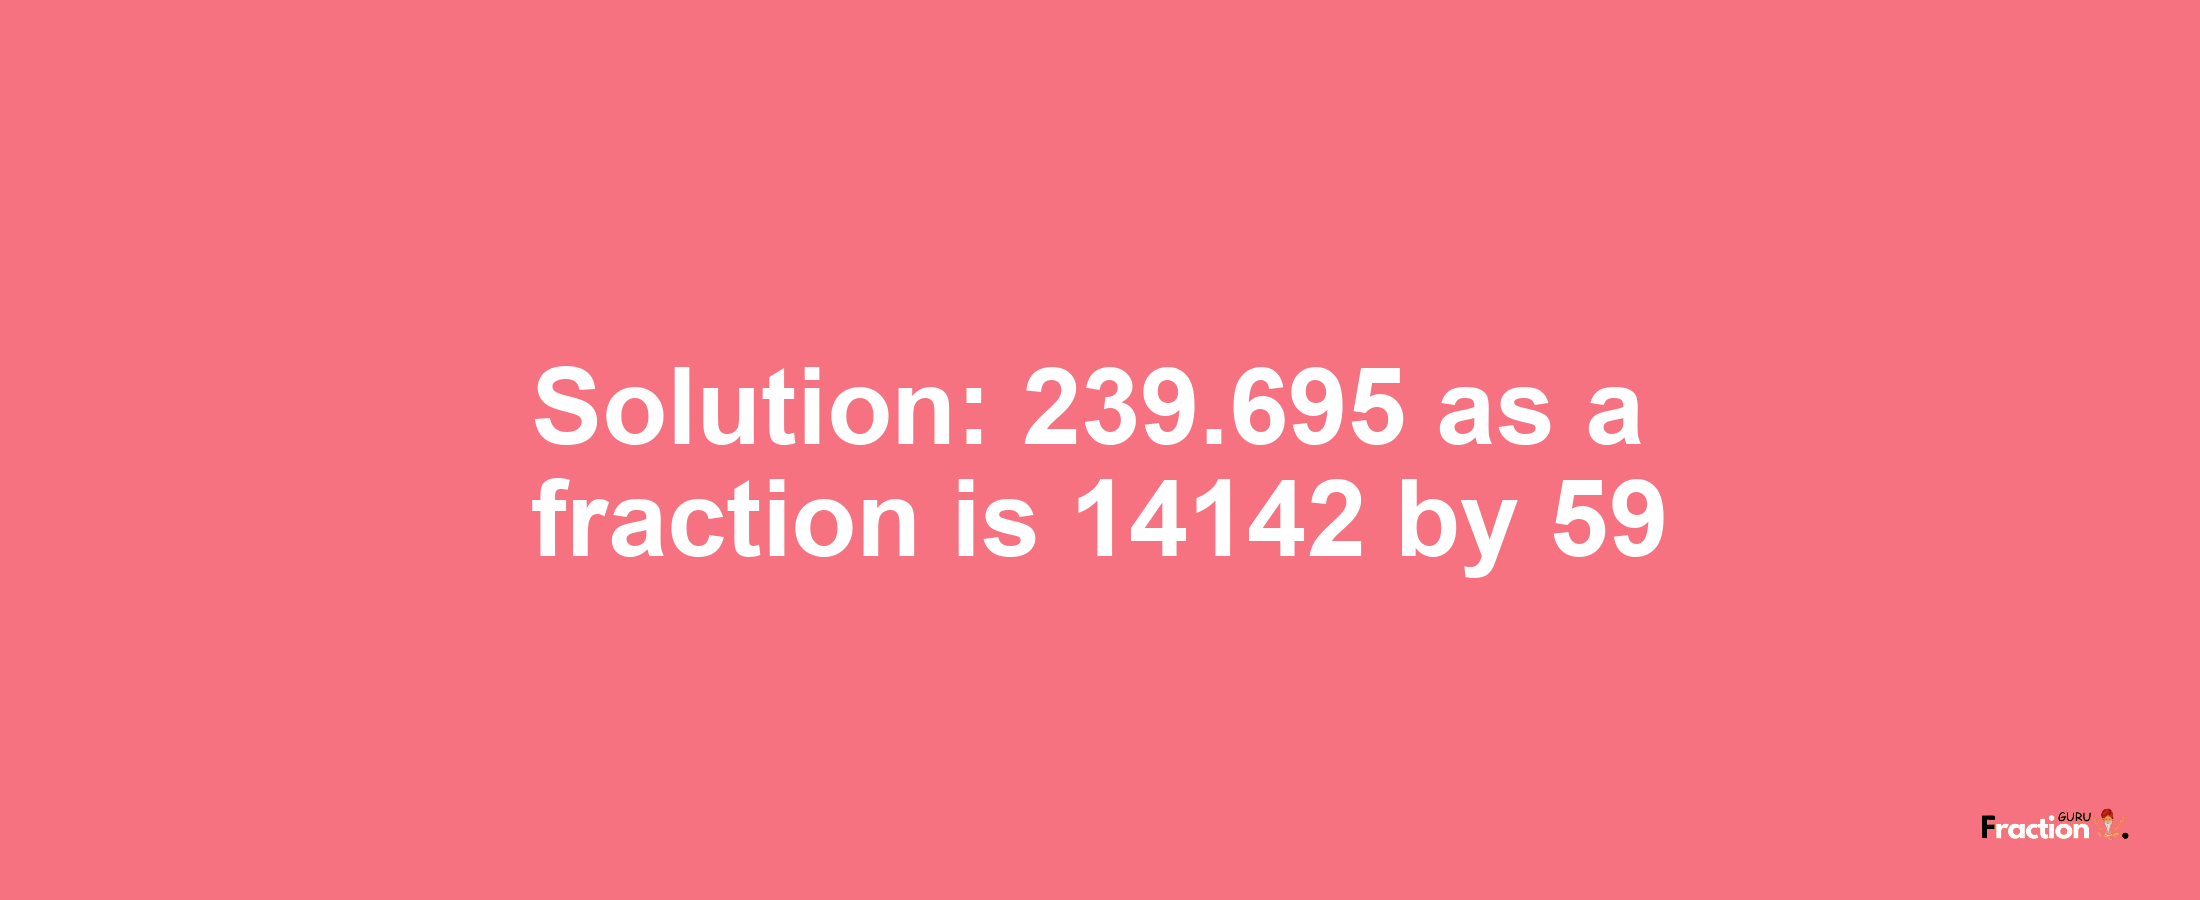 Solution:239.695 as a fraction is 14142/59